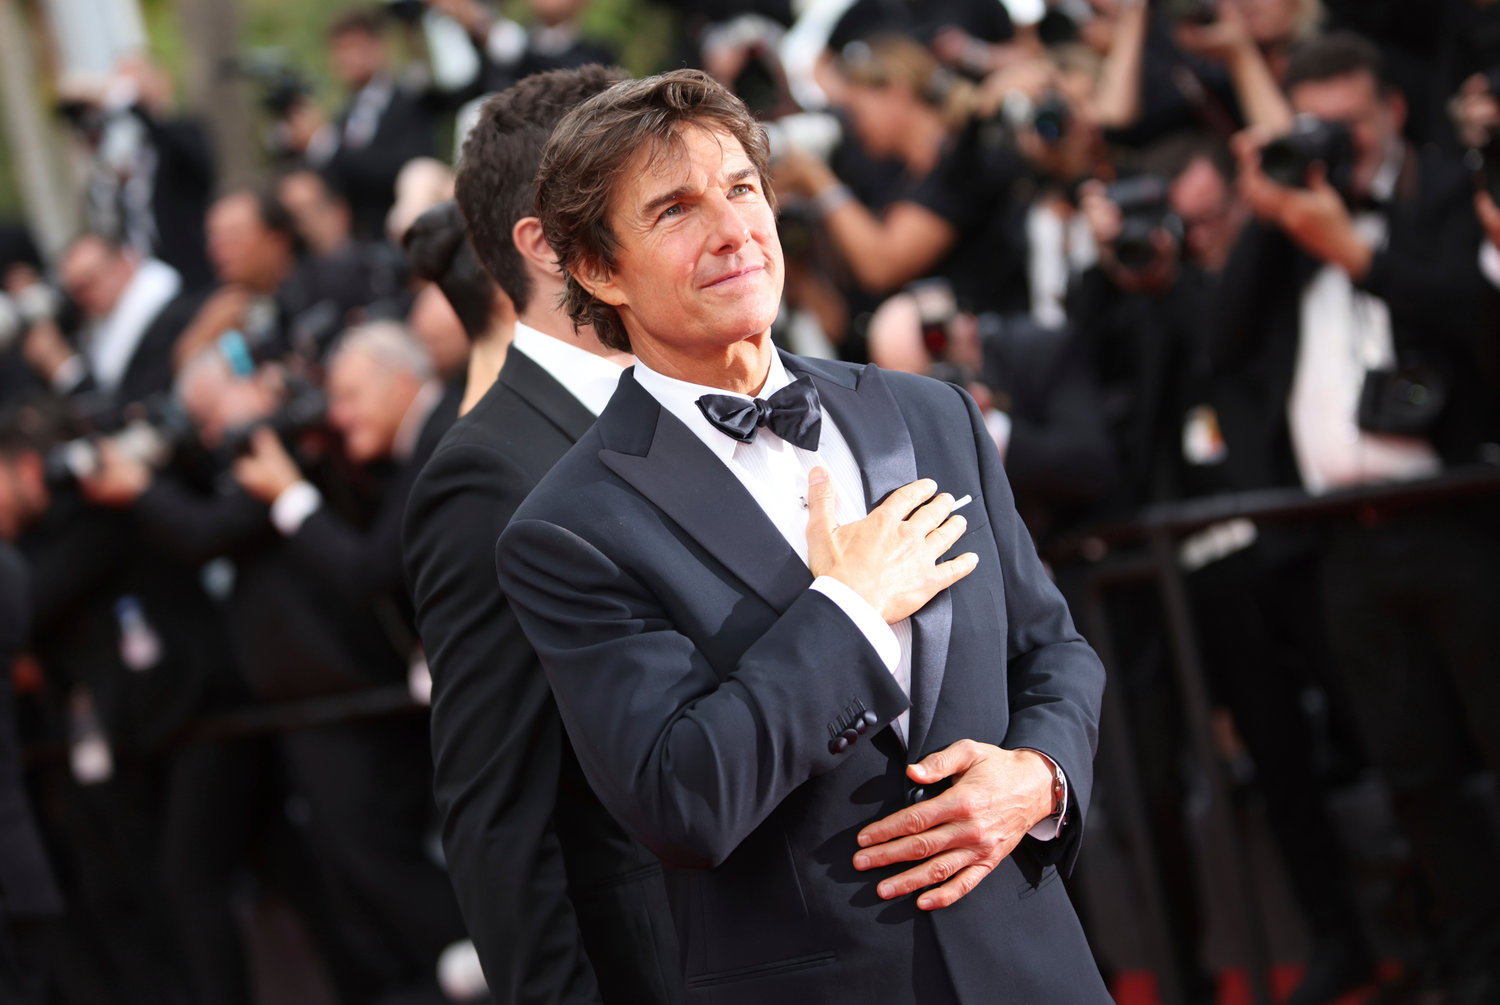 FILE - Tom Cruise gestures at the premiere of his film "Top Gun: Maverick" at the 75th international film festival, Cannes, southern France, on May 18, 2022. (Photo by Vianney Le Caer/Invision/AP, File)